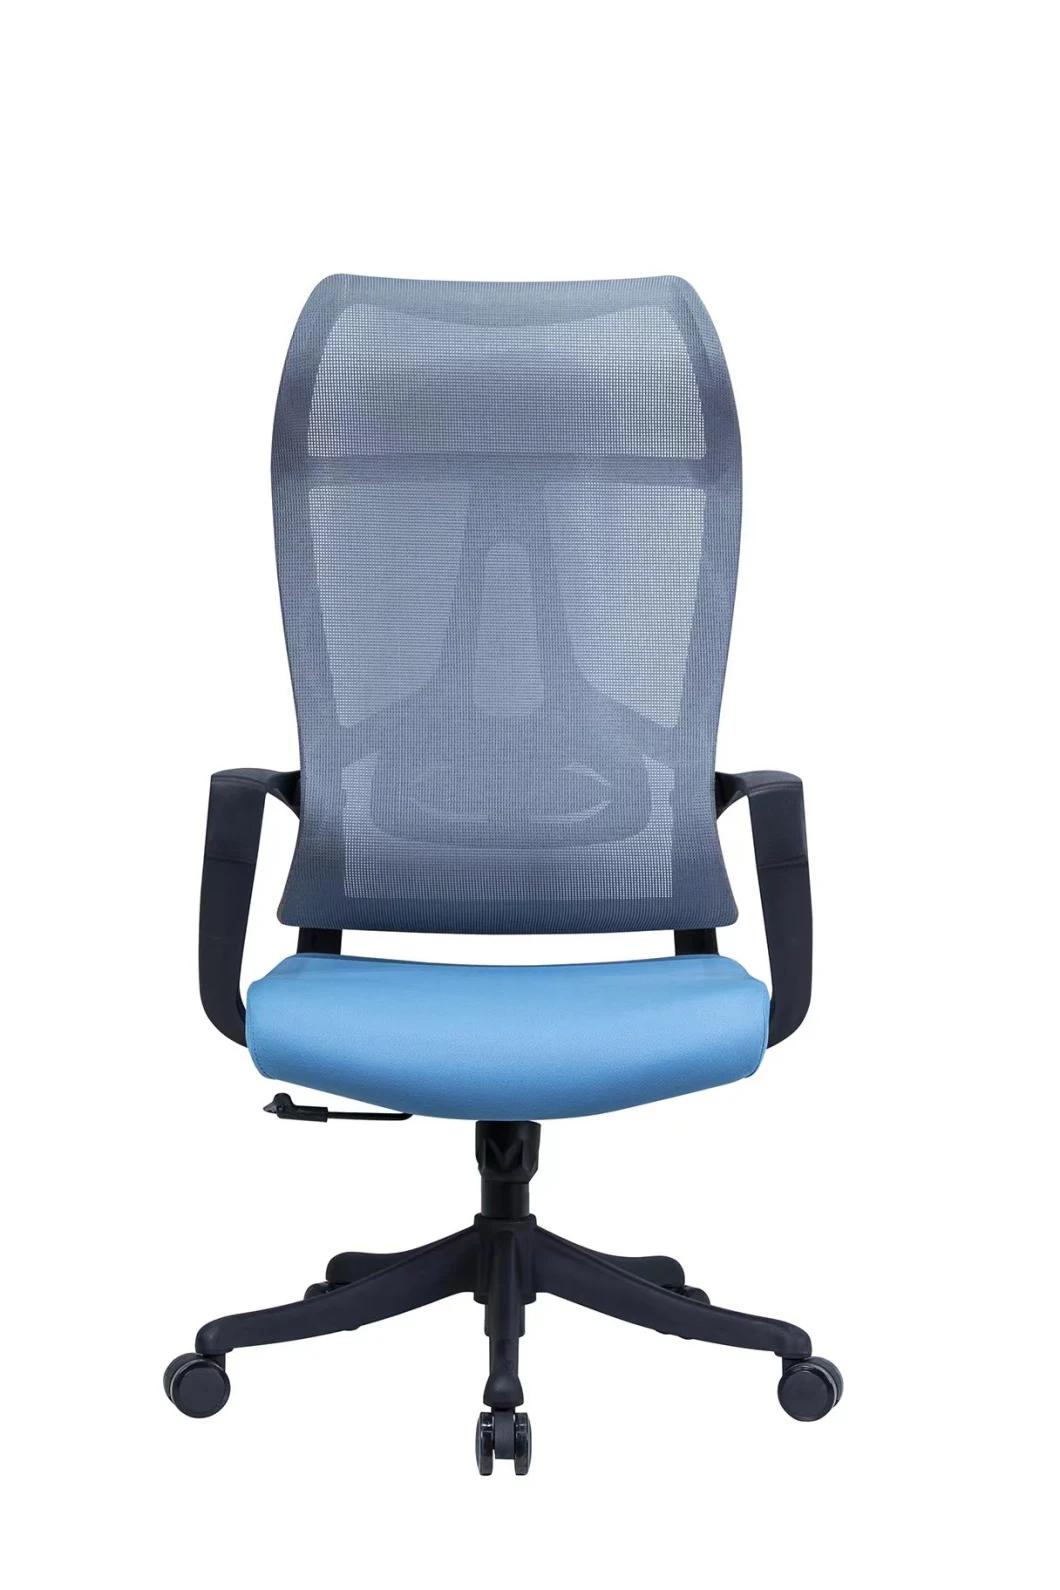 Modern Home Office Furniture New Design Cheap Meeting Computer Gaming Chair